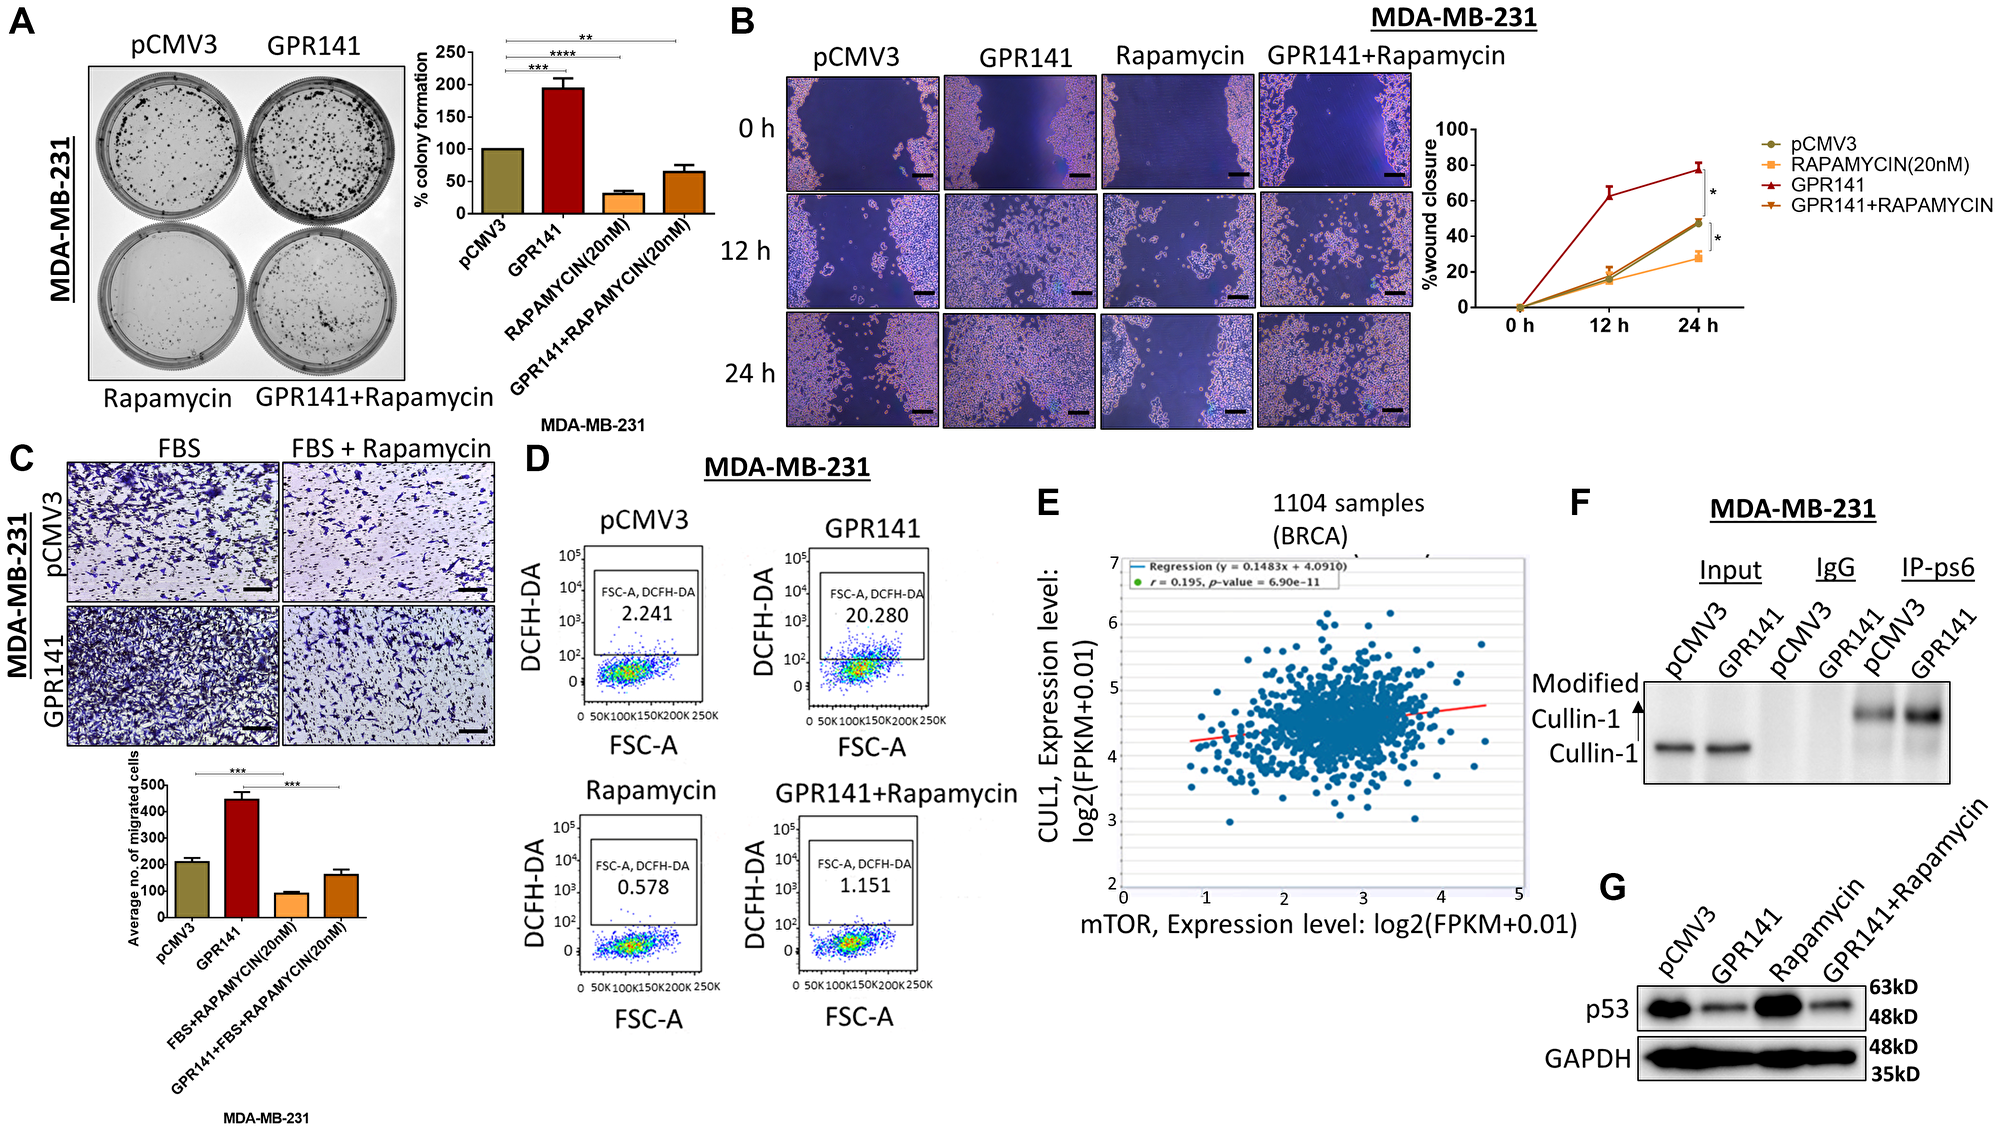 GPR141 overexpression induces breast cancer cell tumorigenesis via the p-mTOR1-p53 pathway.